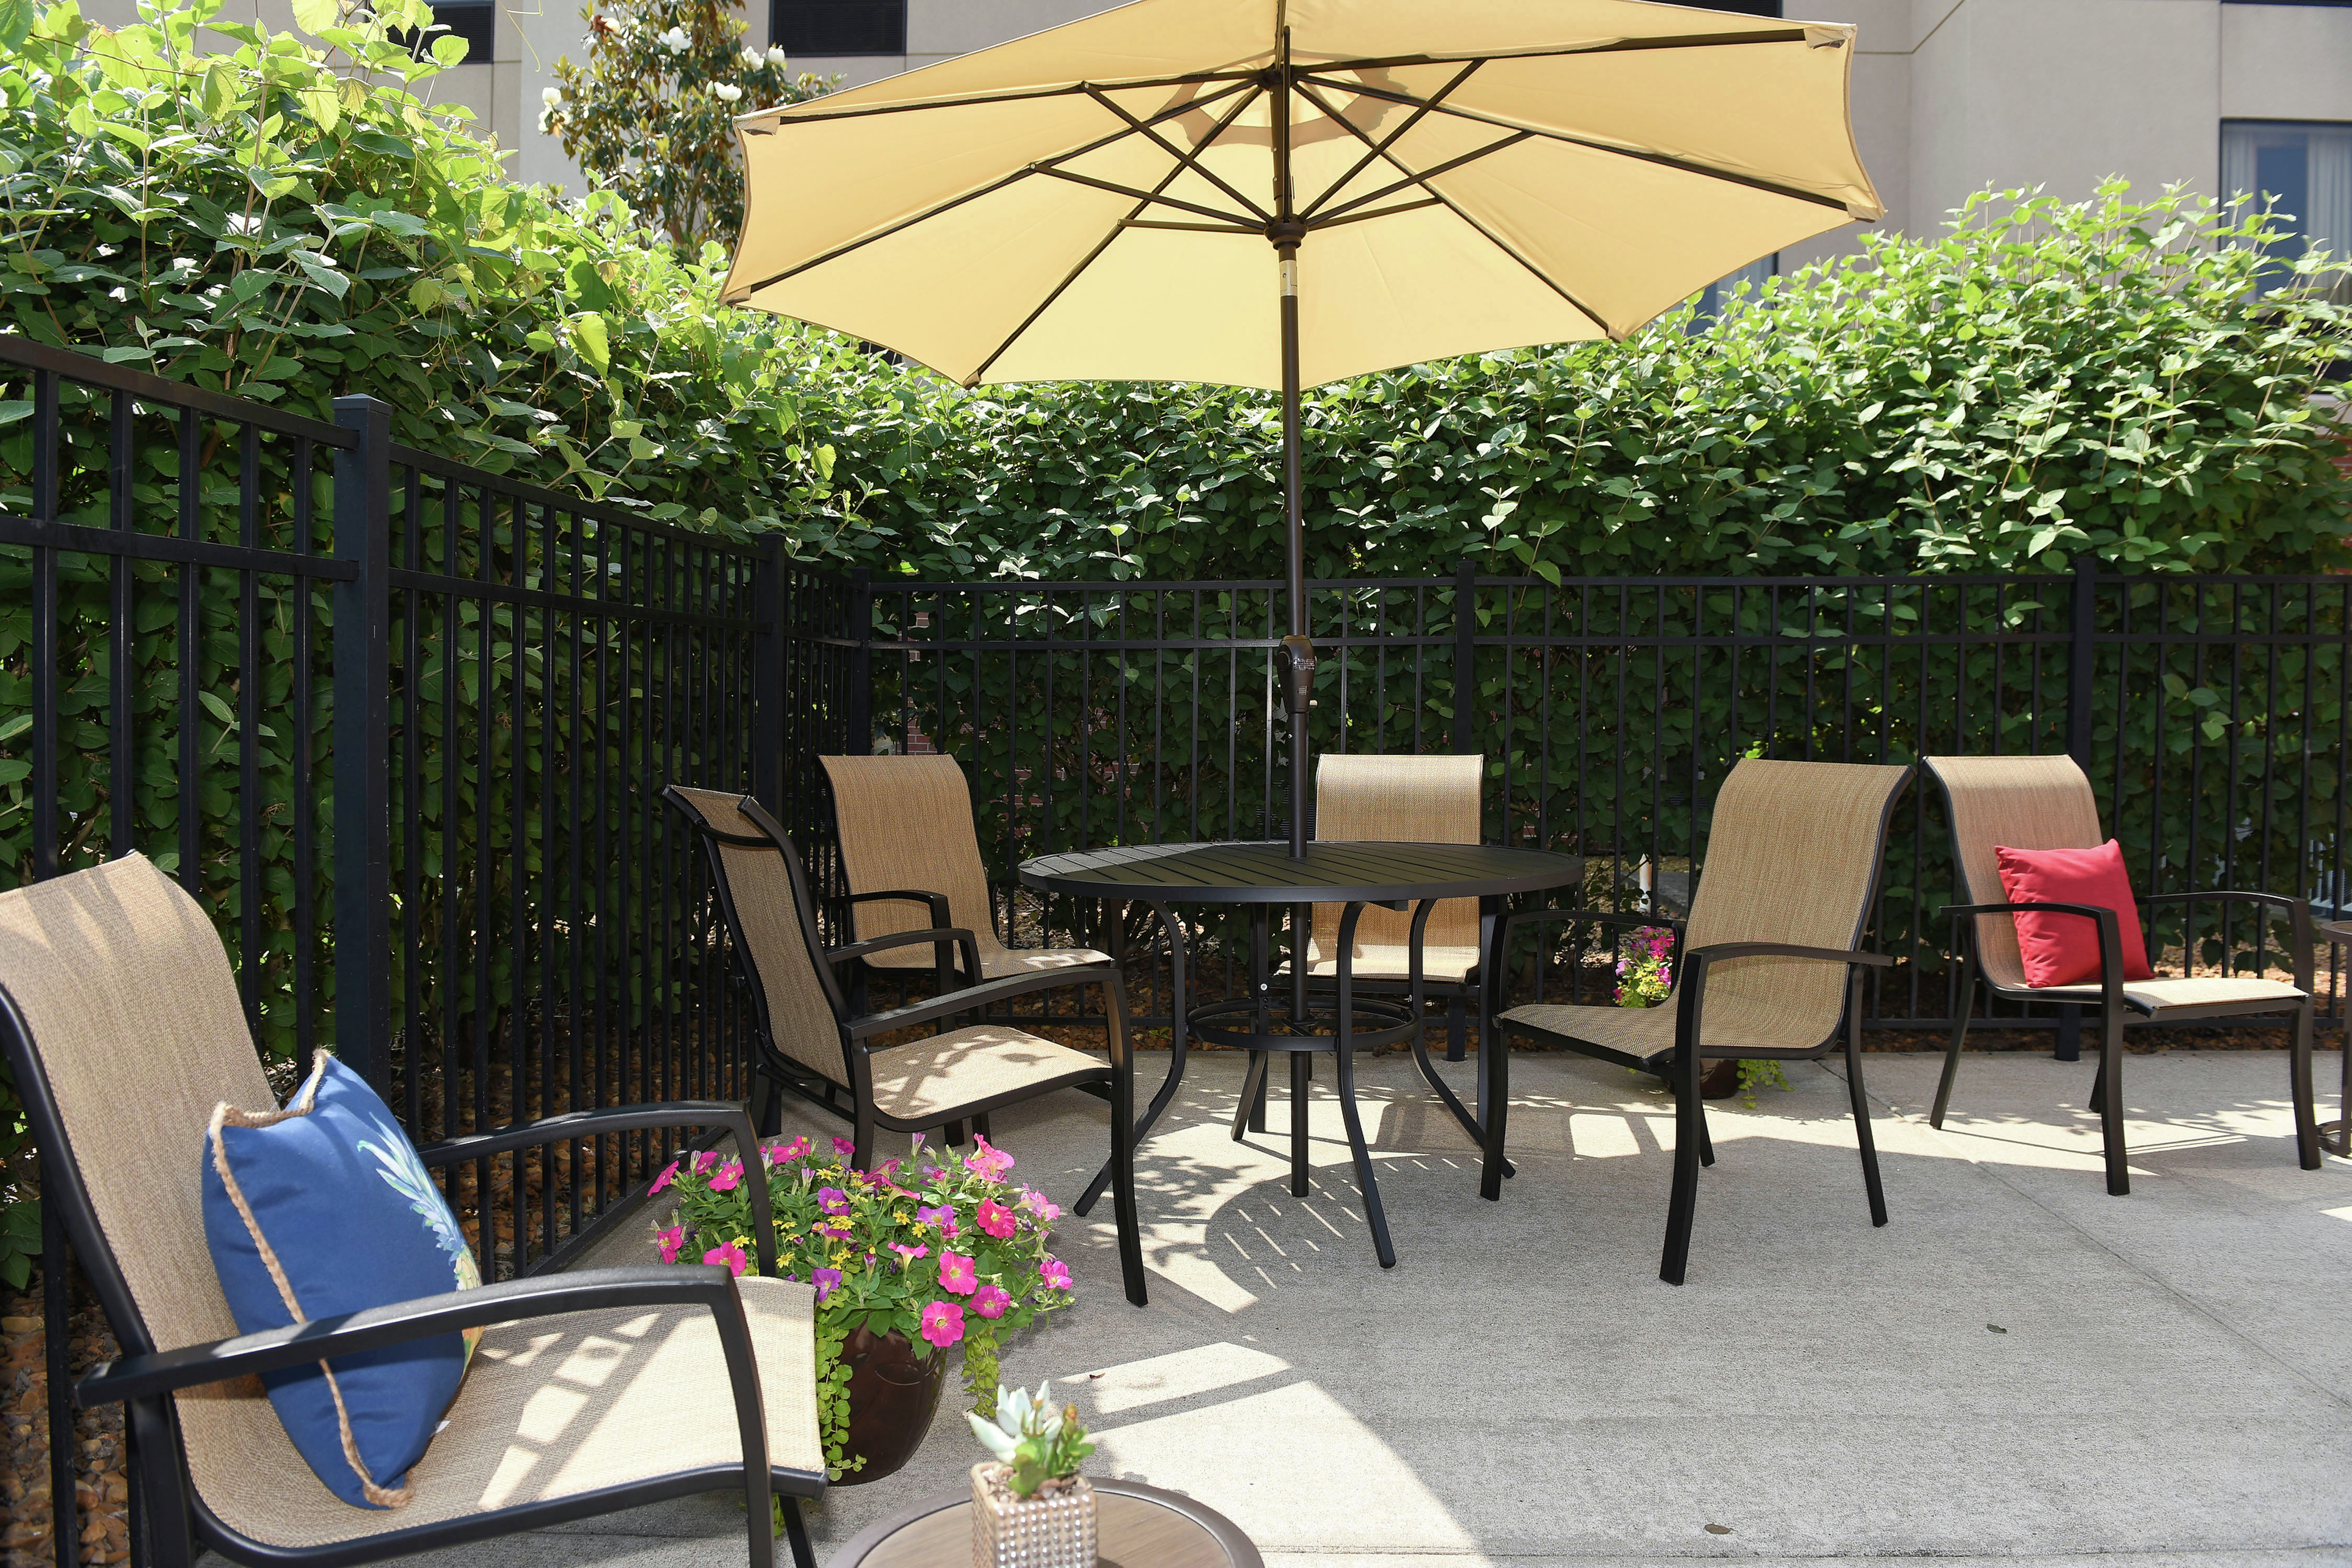 Soak up the sun on our Patio.